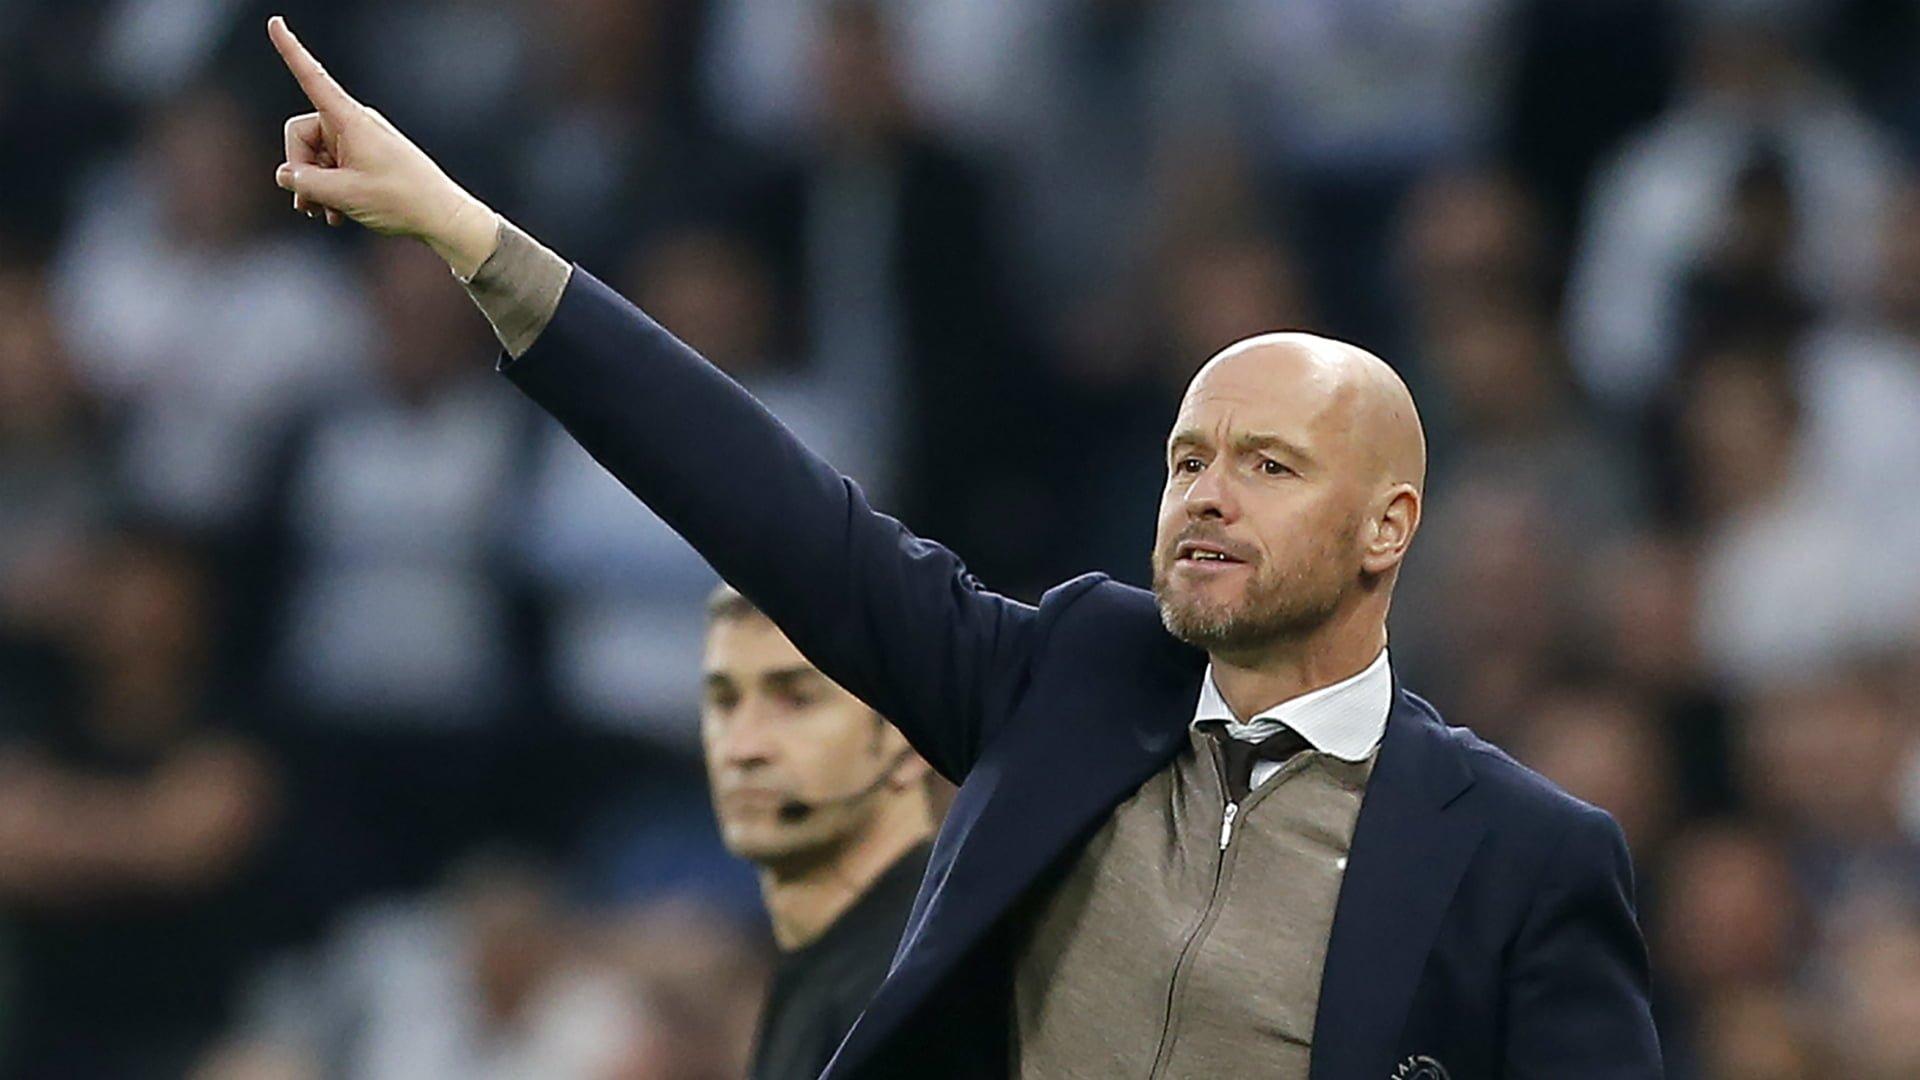 EPL: Manchester United officially announce Erik ten Hag as new manager